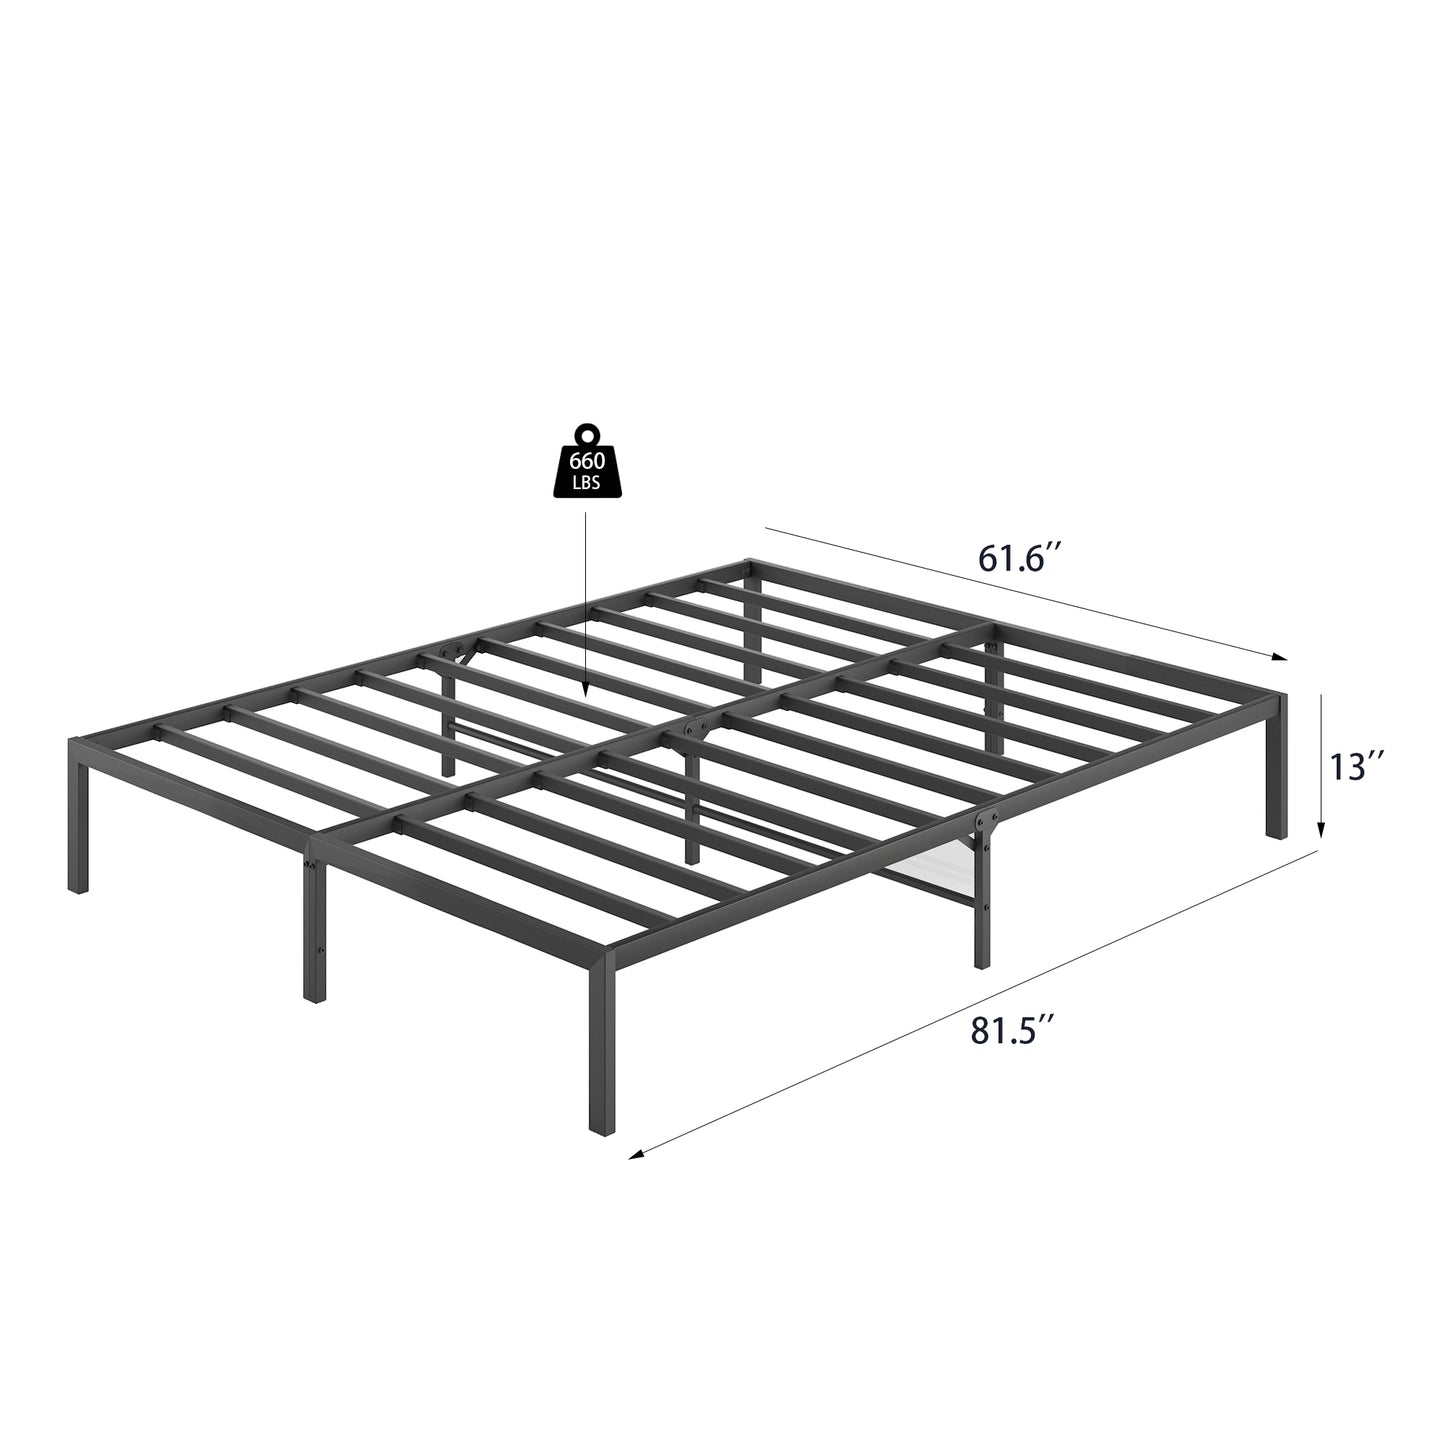 Queen Size Metal Platform Bed Frame, HSUNNS Heavy Duty Queen Metal Bed Base with 13in Under-Bed Storage Space, Queen Size Platform Bed with Solid Metal Slat Support, No Box Spring Needed, Black